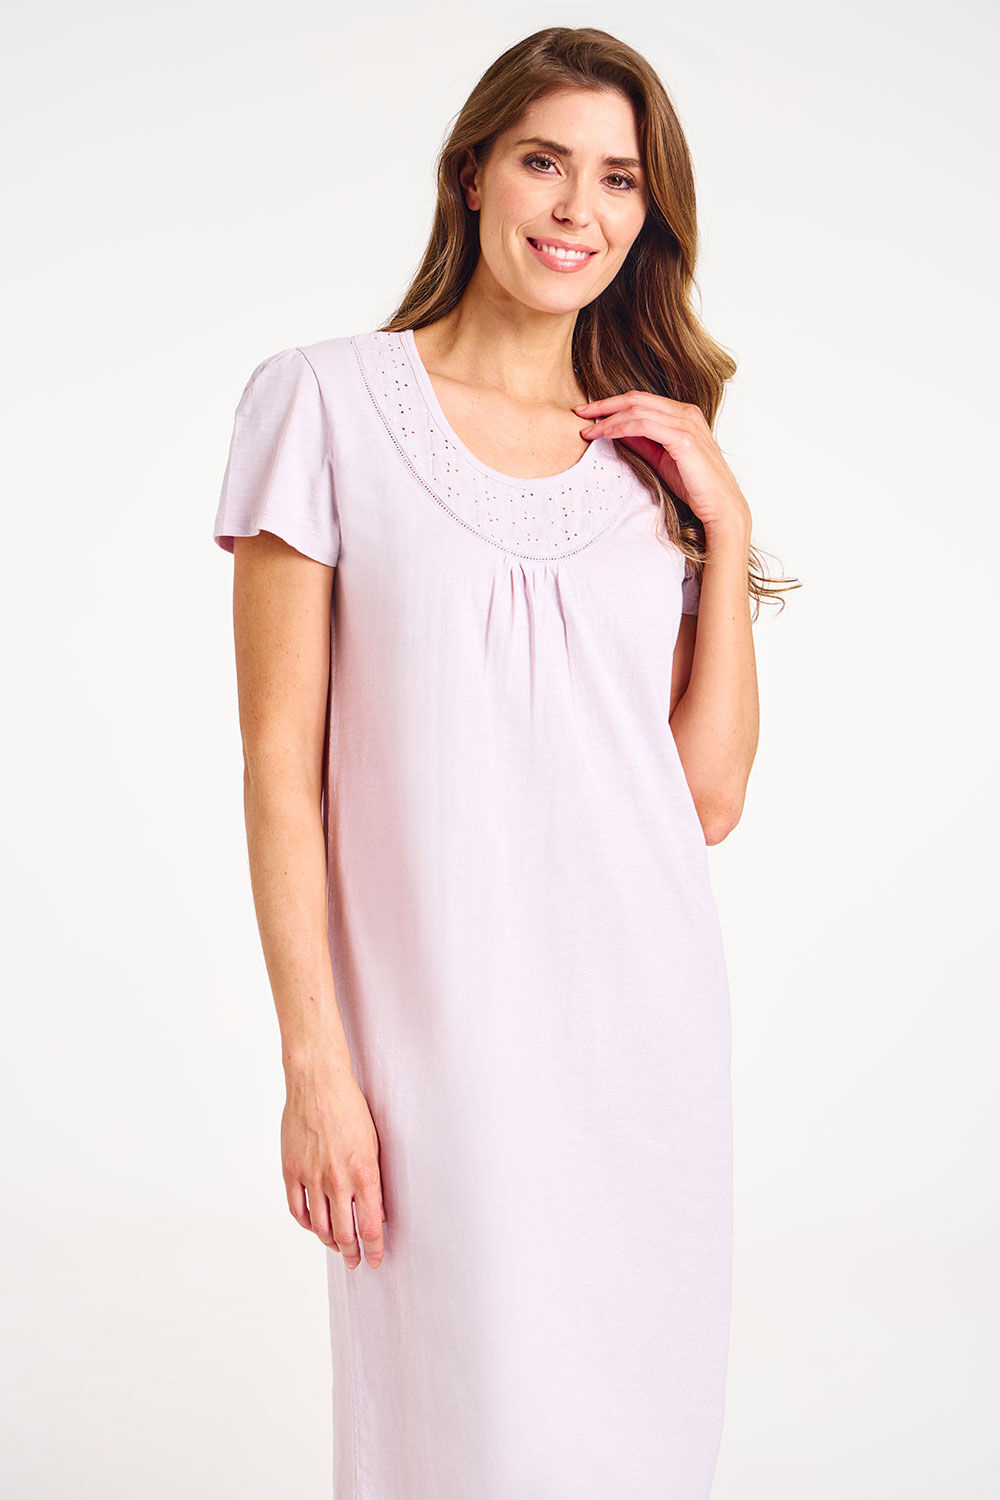 Bonmarche Lilac Short Sleeve Broderie and Jersey Nightdress, Size: 18